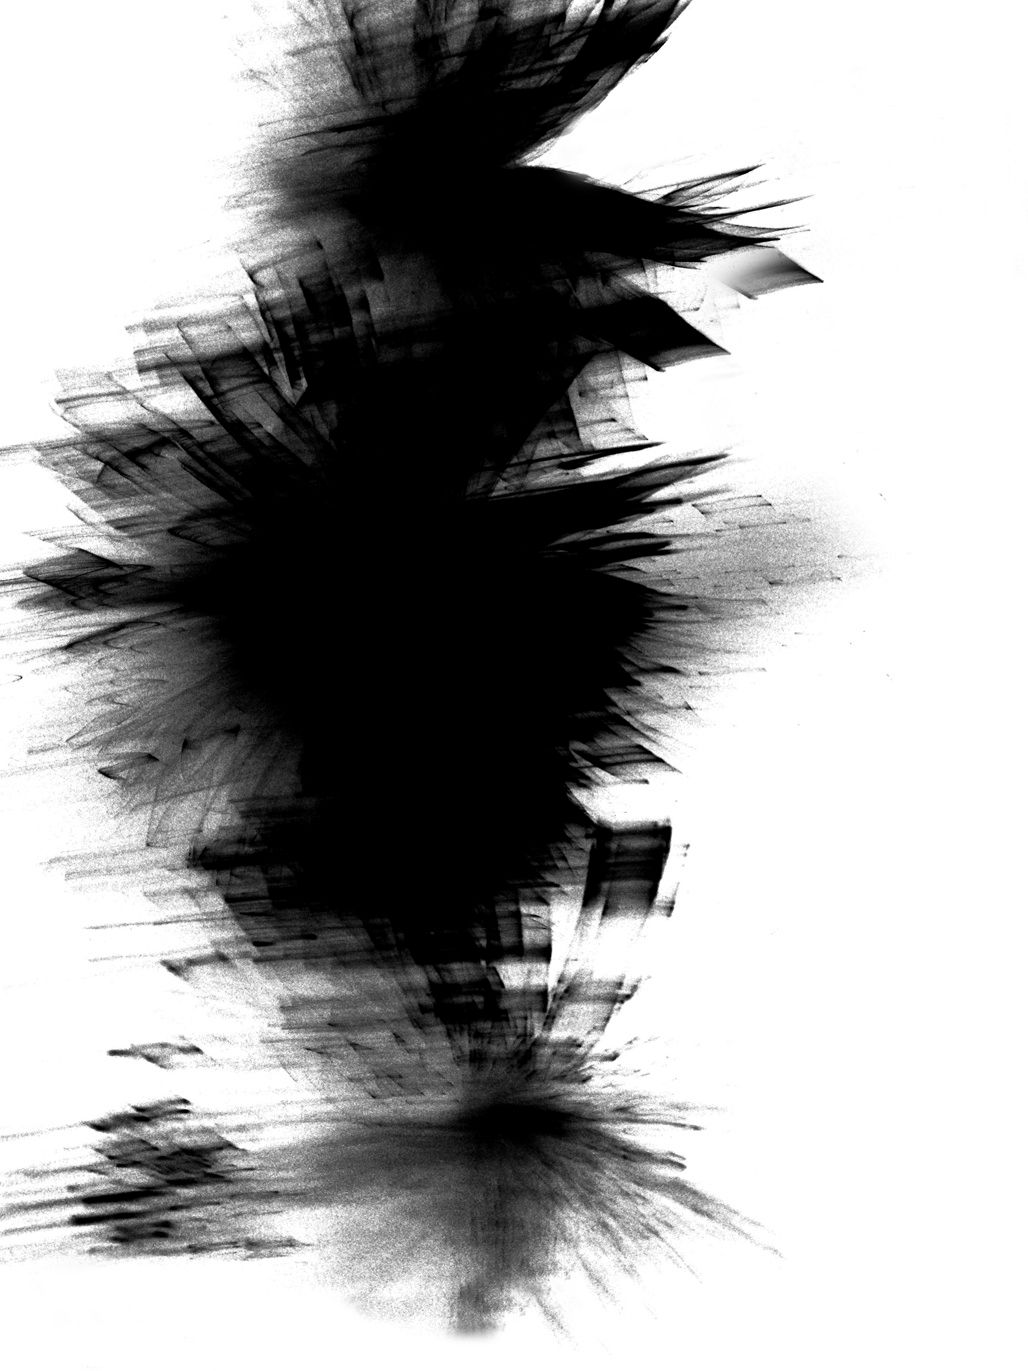 Untitled, Feathers, 2011, Black and White Abstract Photography, Shirine Gill